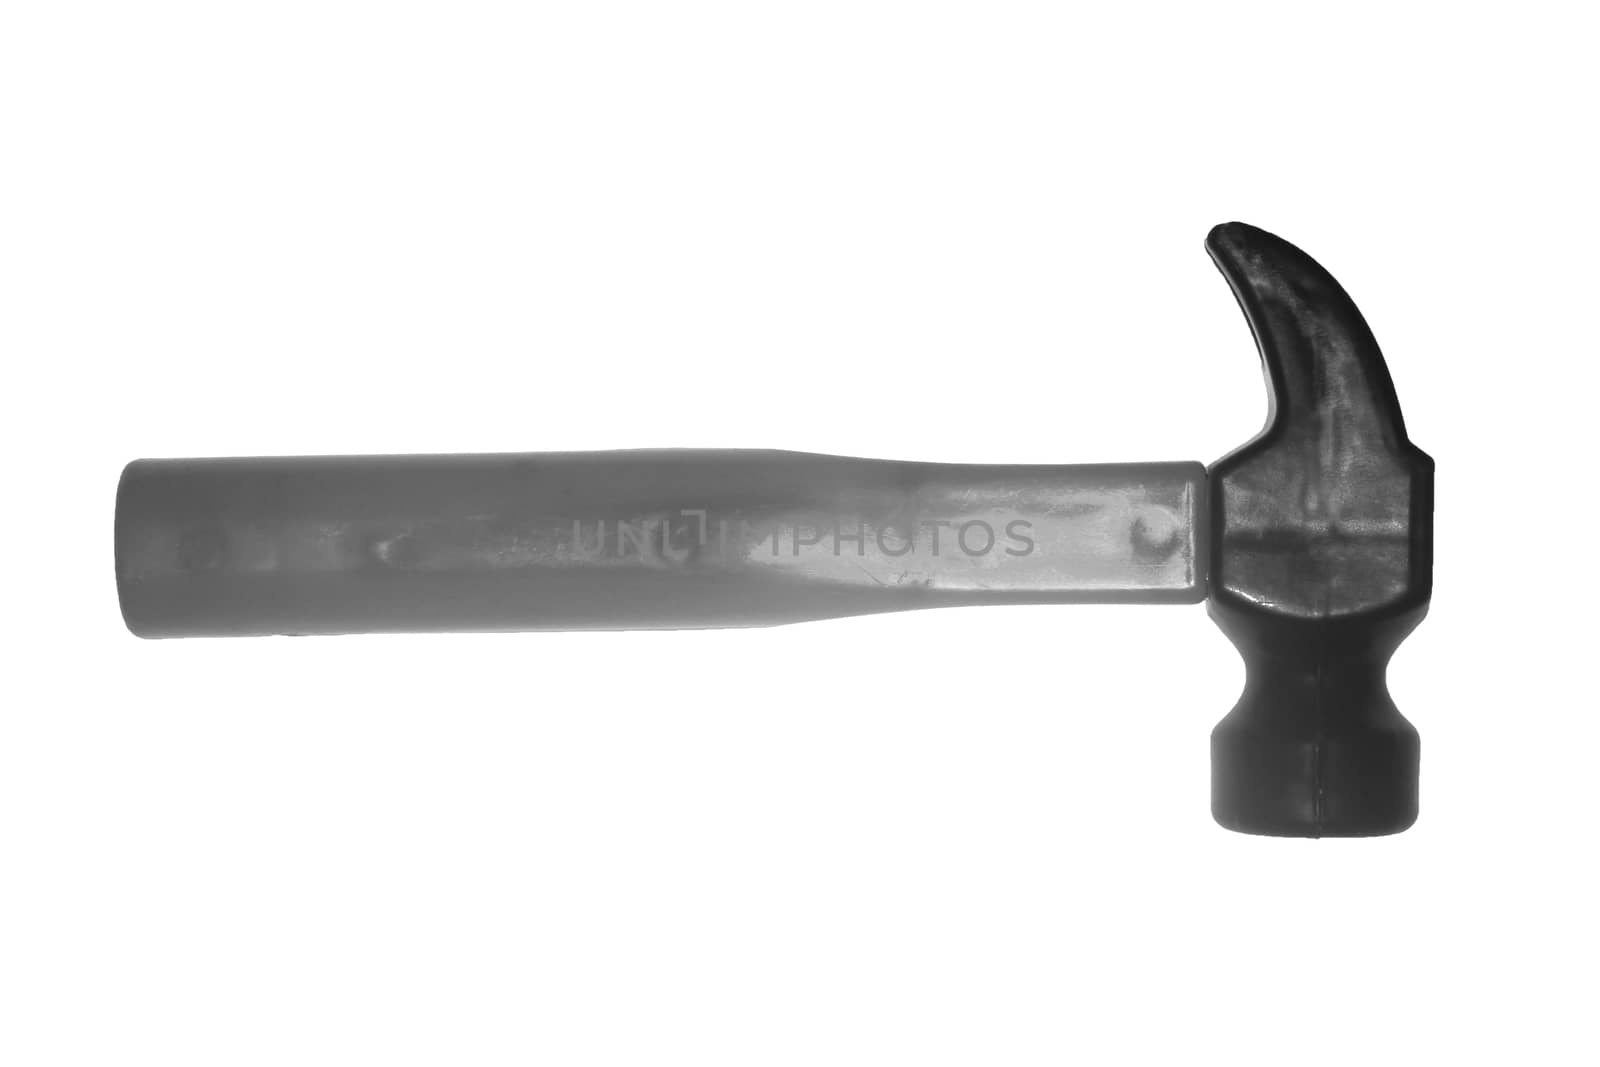 Work tool, Hammer by yands